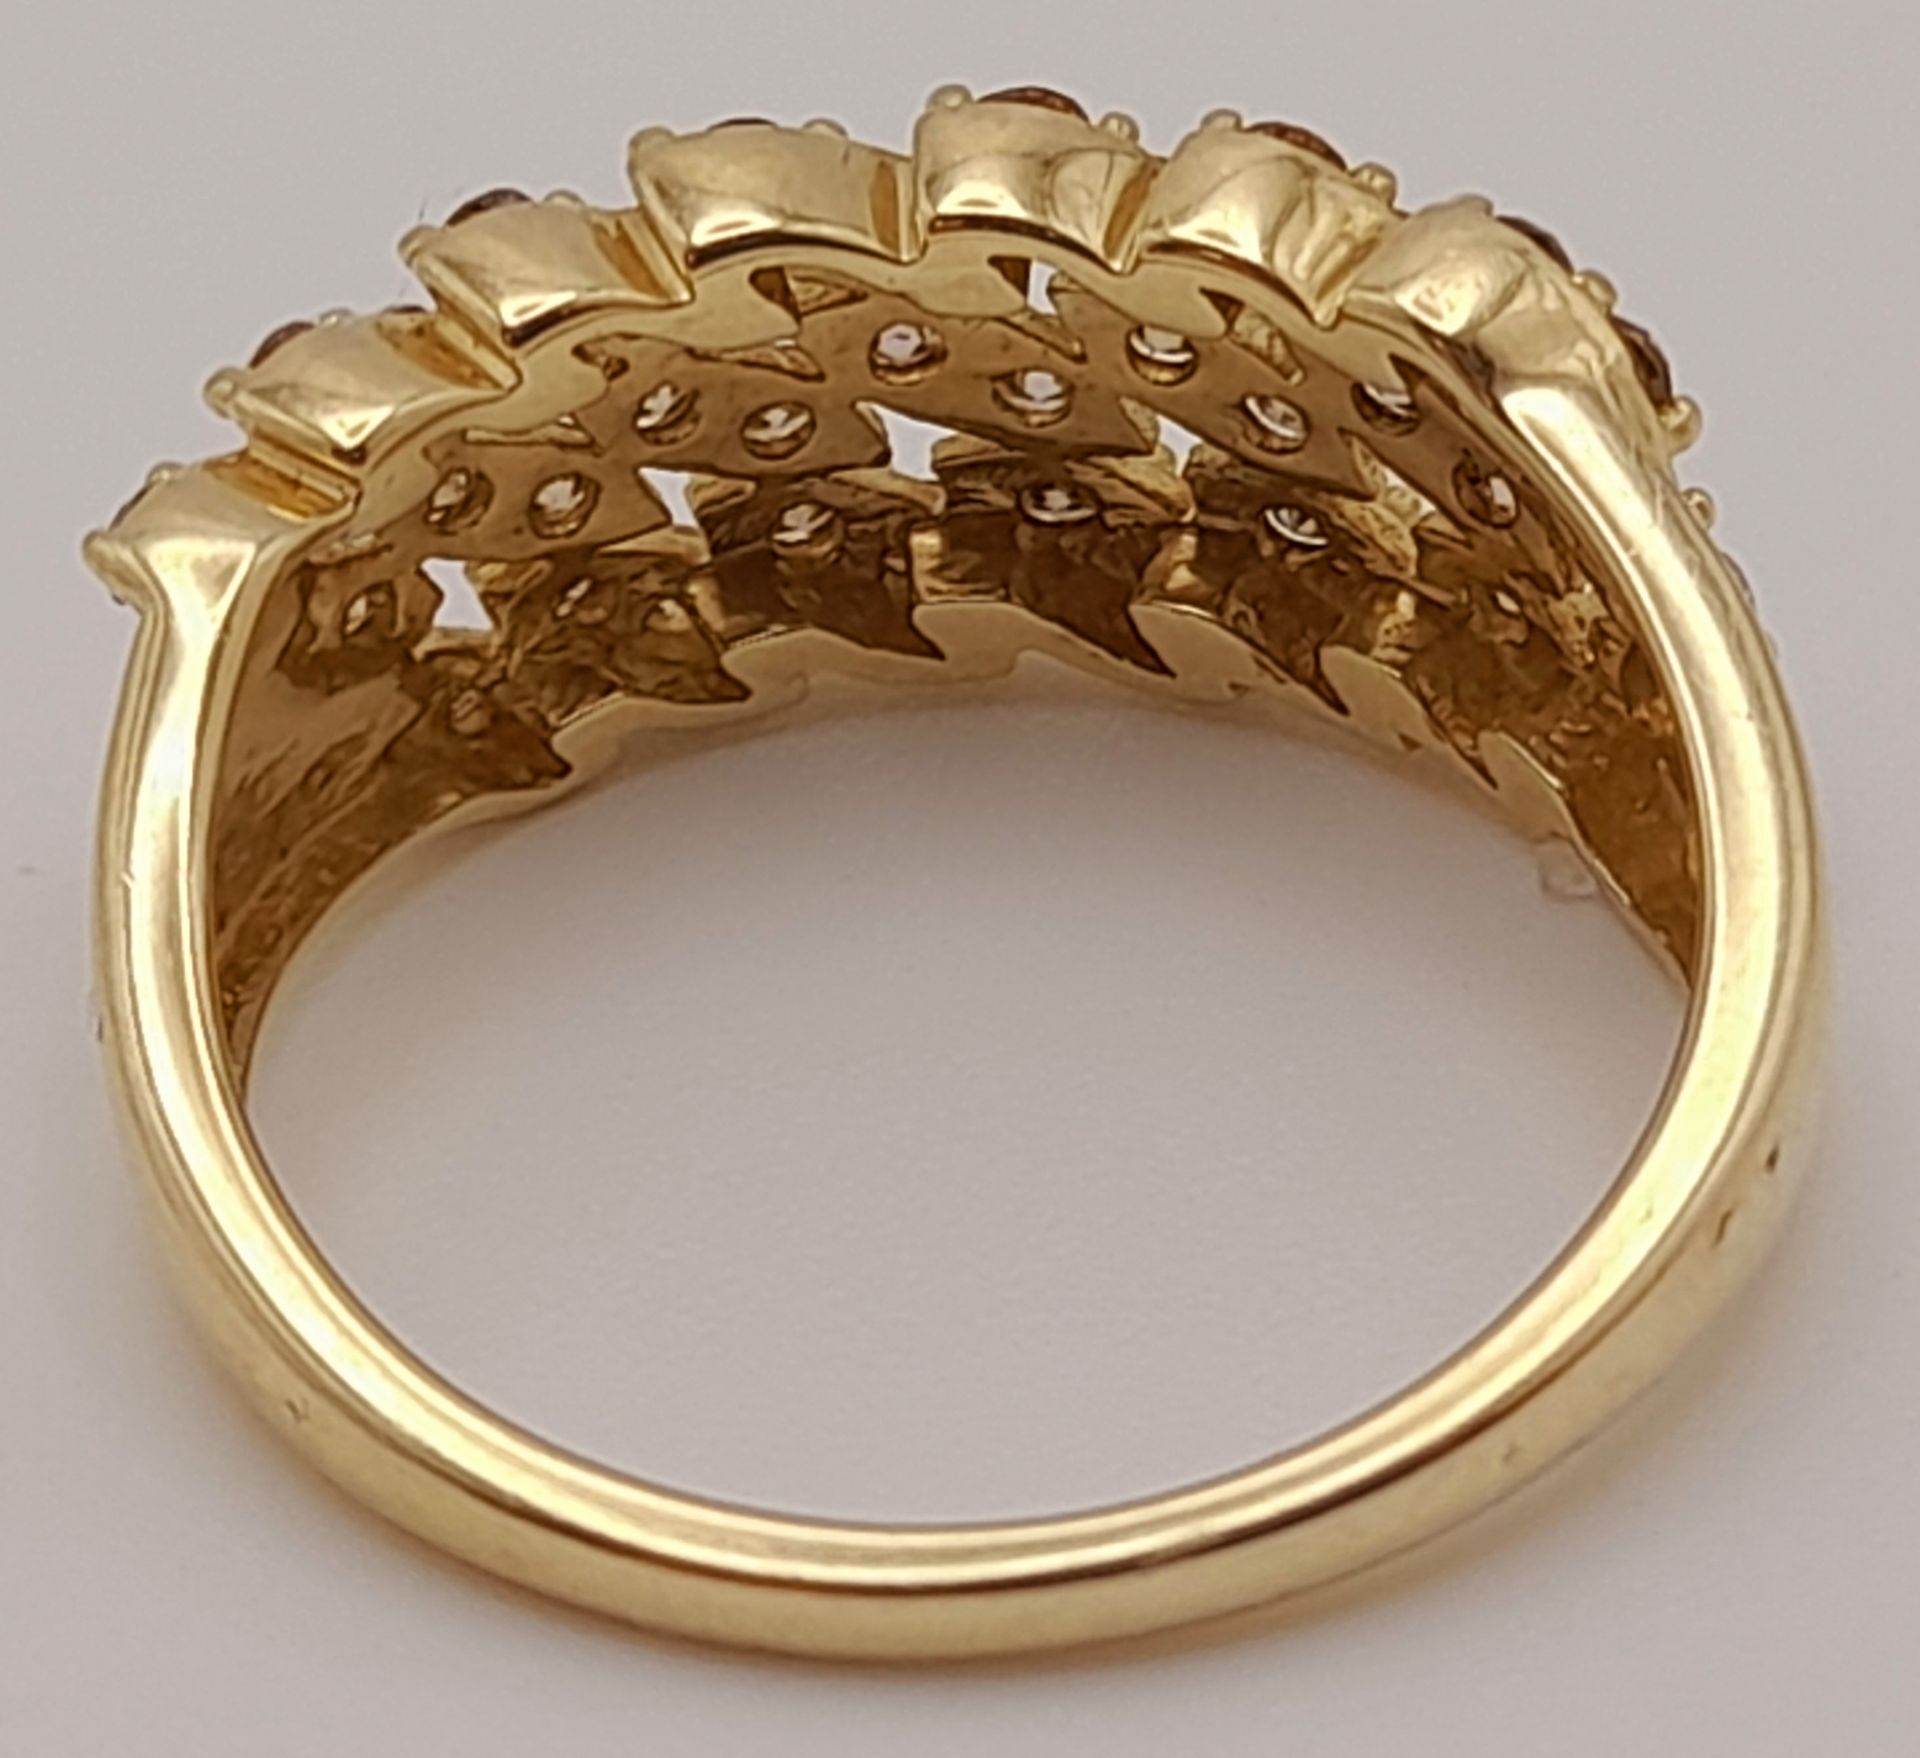 A 10K YELLOW GOLD DIAMOND SET RING. 0.50ctw, Size N1/2, 3.1g total weight. Ref: SC 8008 - Image 3 of 4